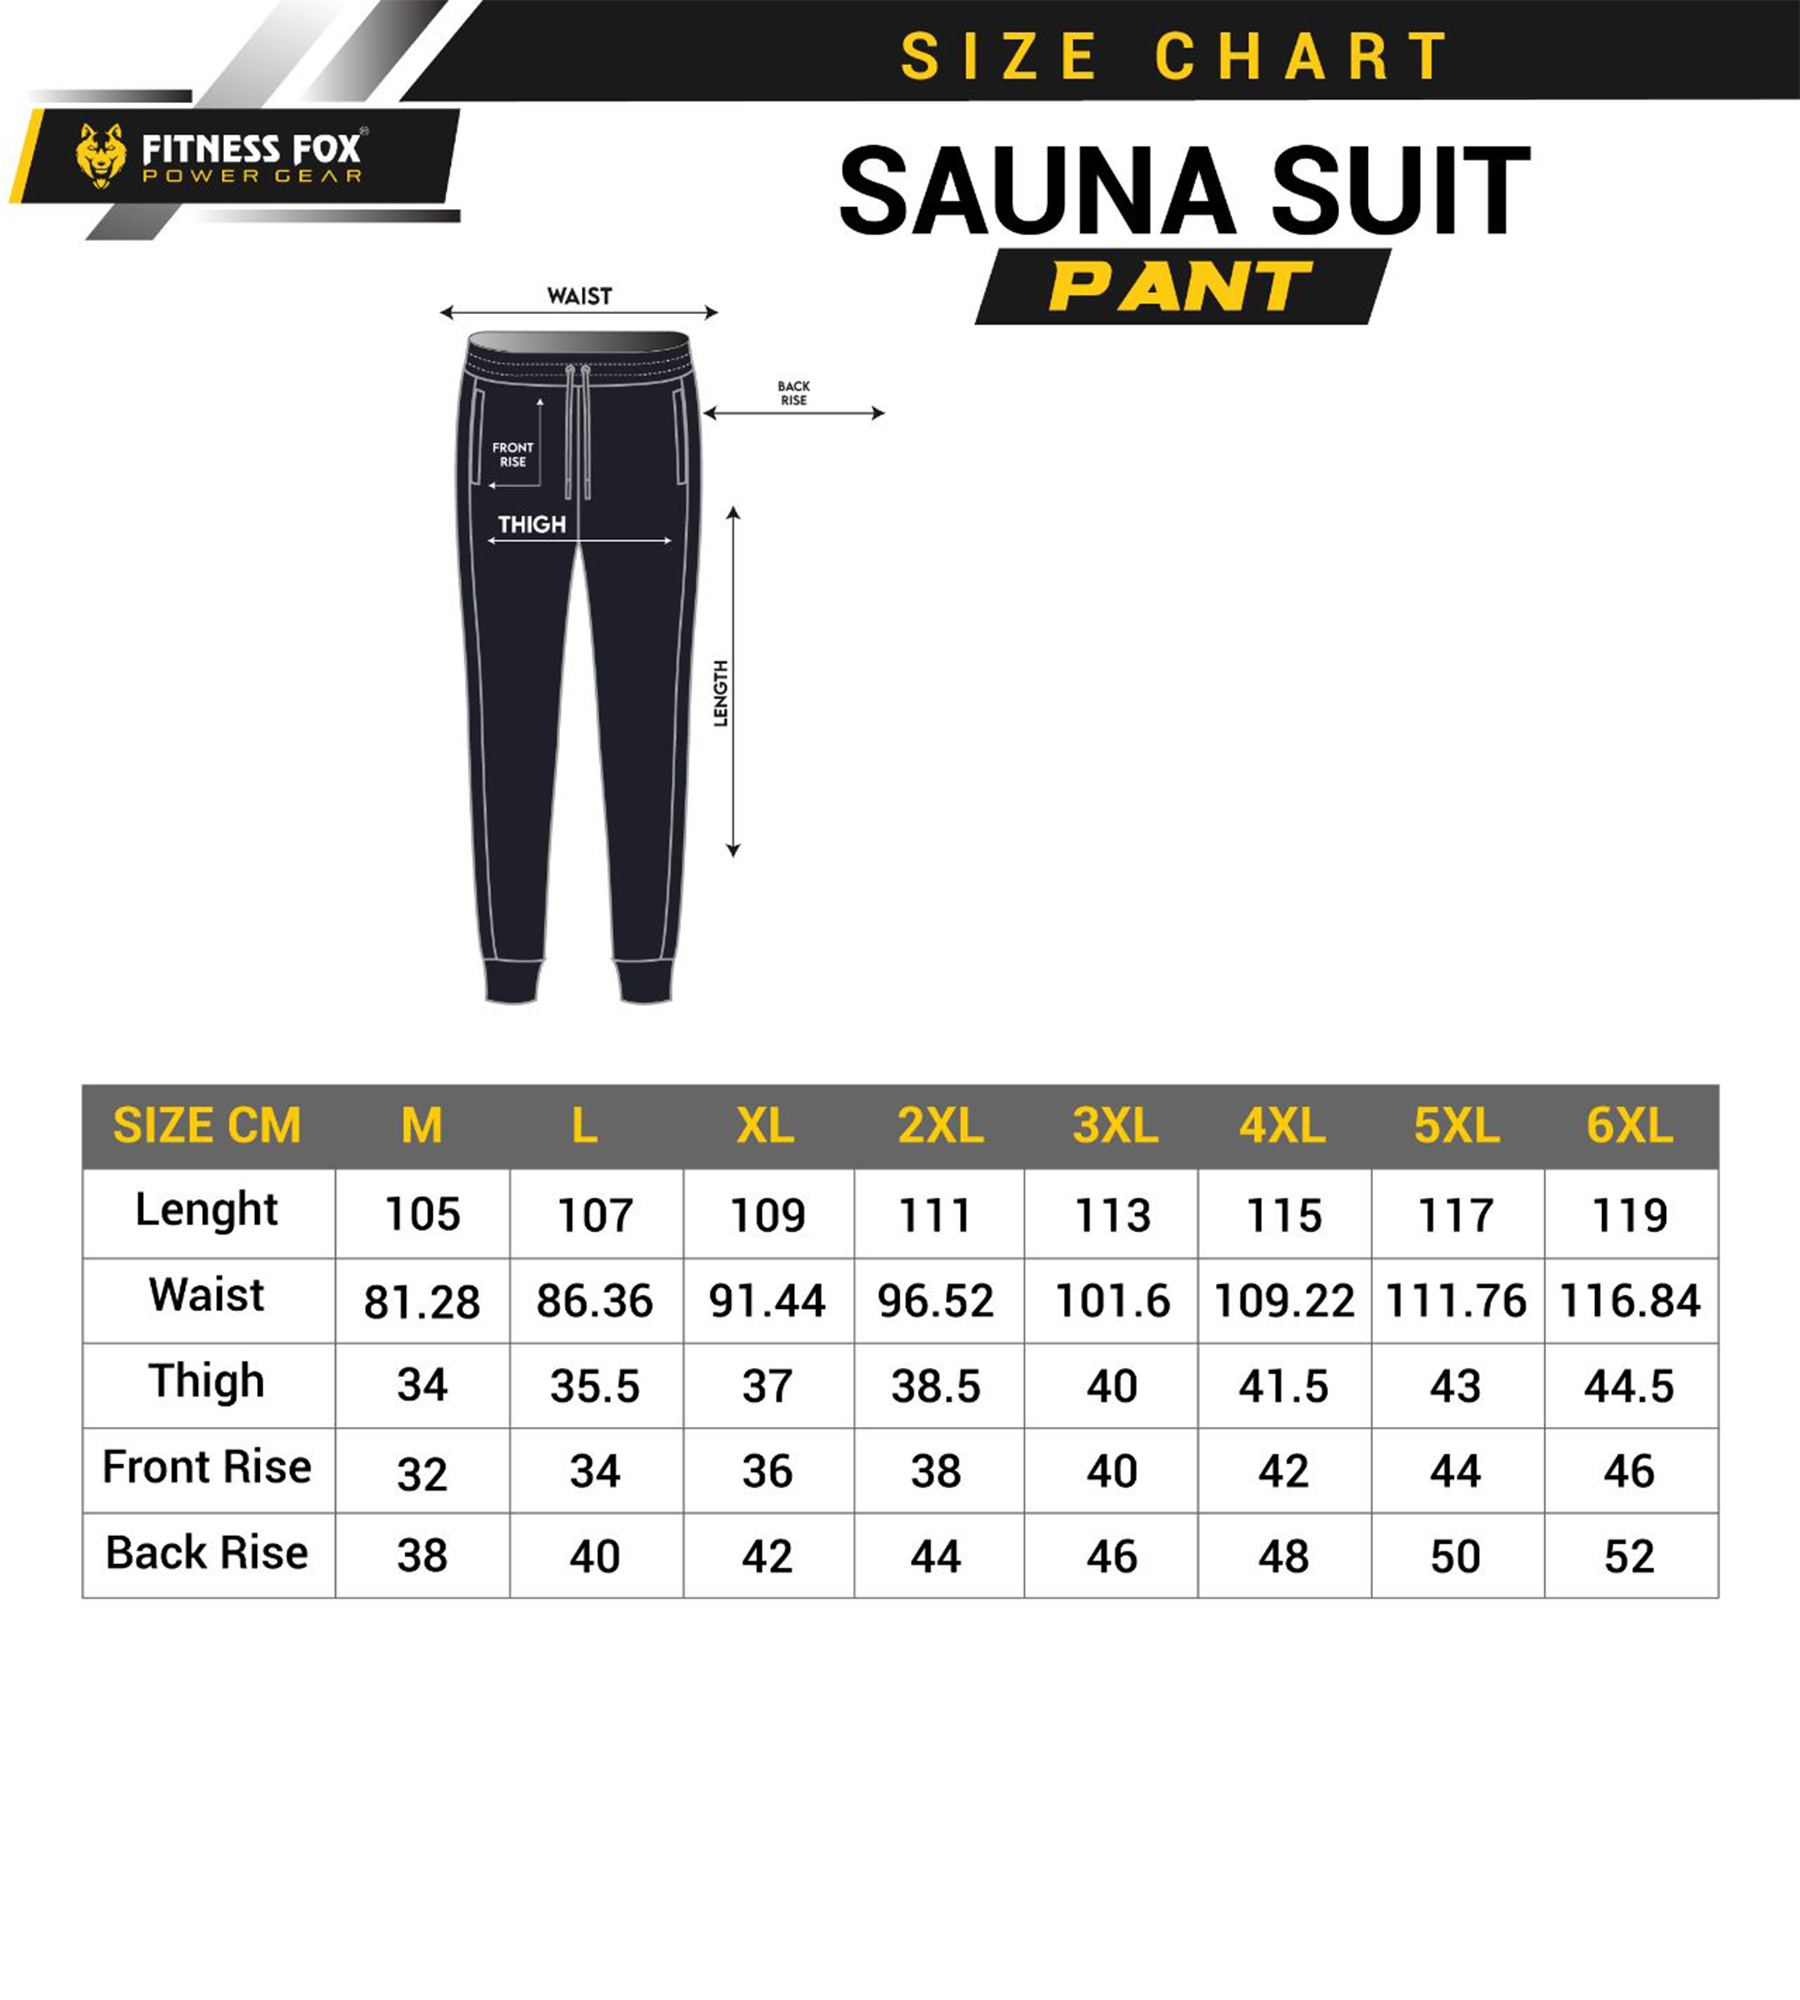 FITNESS FOX Sweat Sauna PANT for Workout- Black/White